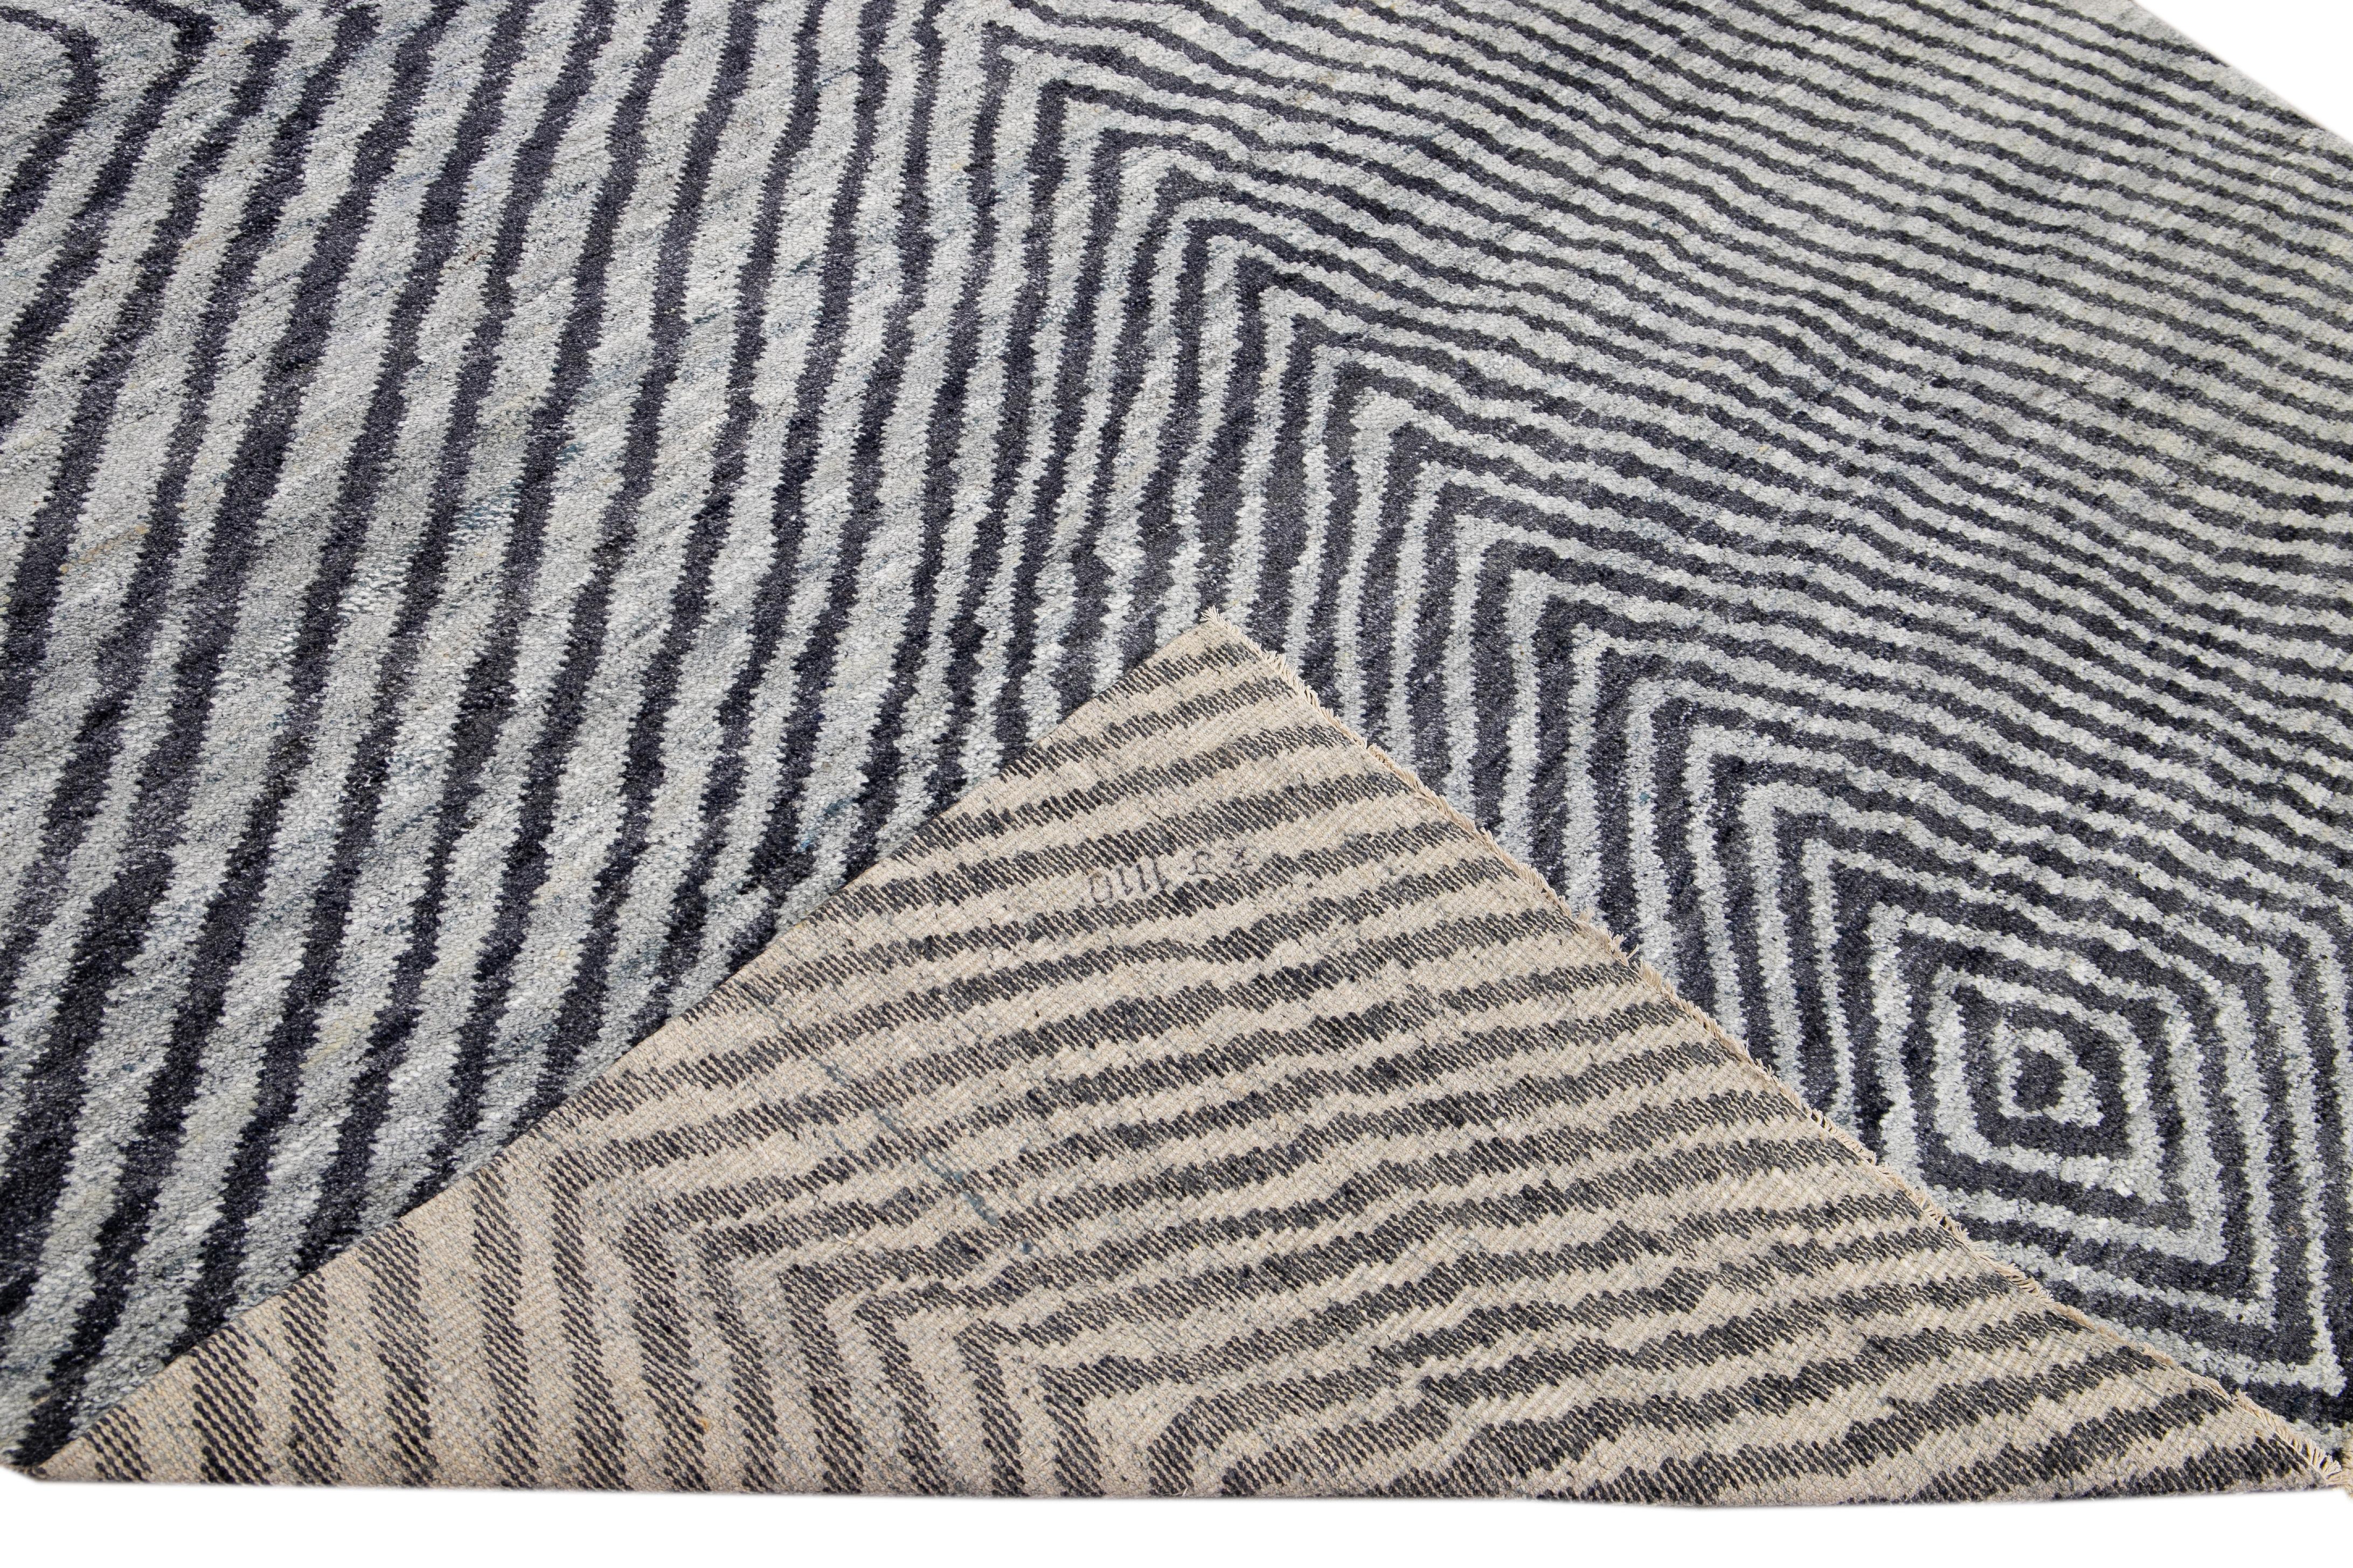 Beautiful Modern Vivien hand-knotted wool light gray field. This piece has gray accents in a gorgeous all-over seamless abstract design.

This rug measures 9' x 12'.
 
Our rugs are professional cleaning before shipping.